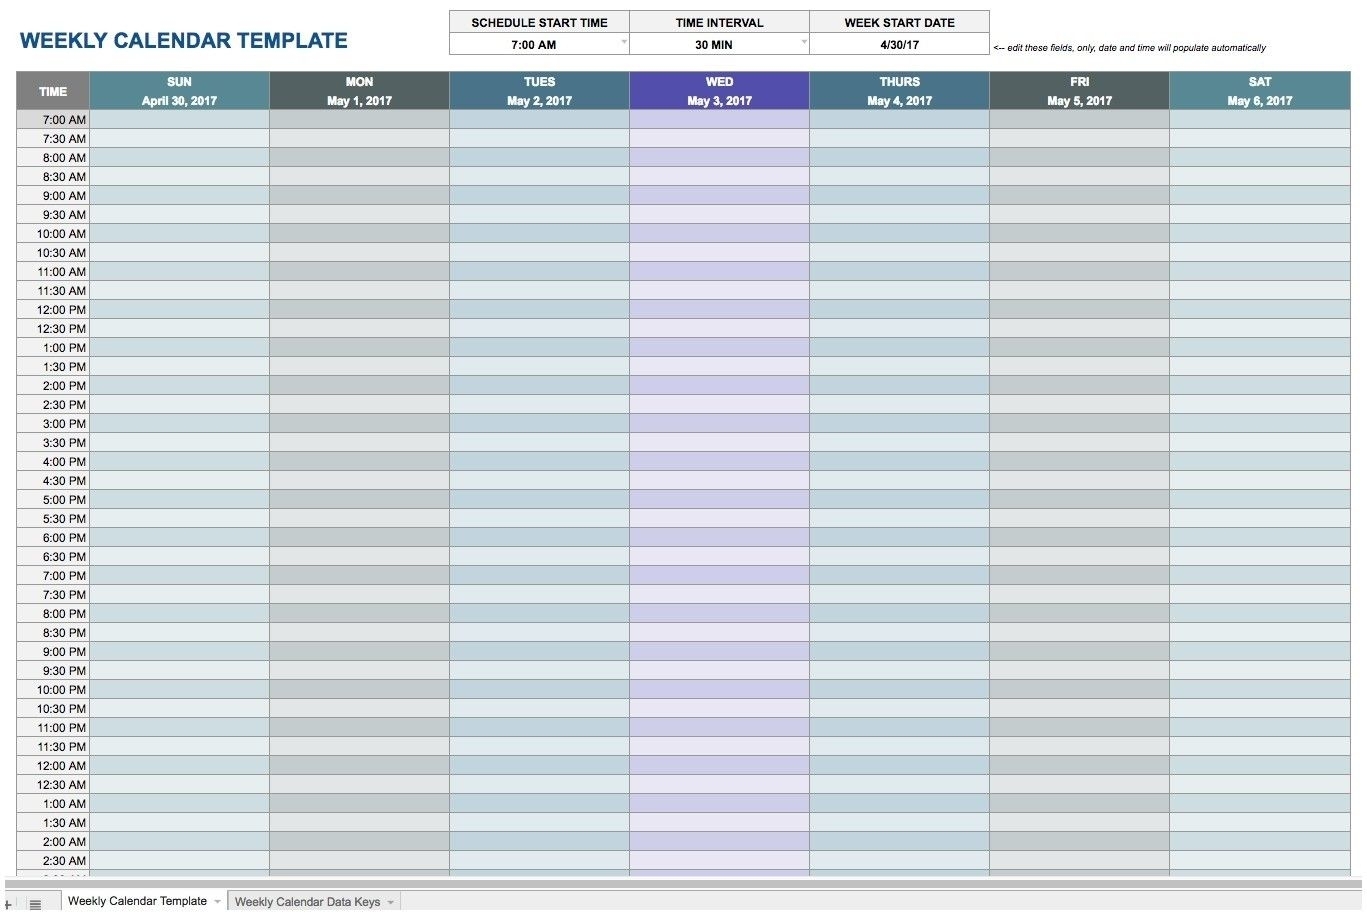 Daily Calendar Template Excel Appointment Schedule Template intended for Time Slot Template Schedule Excel